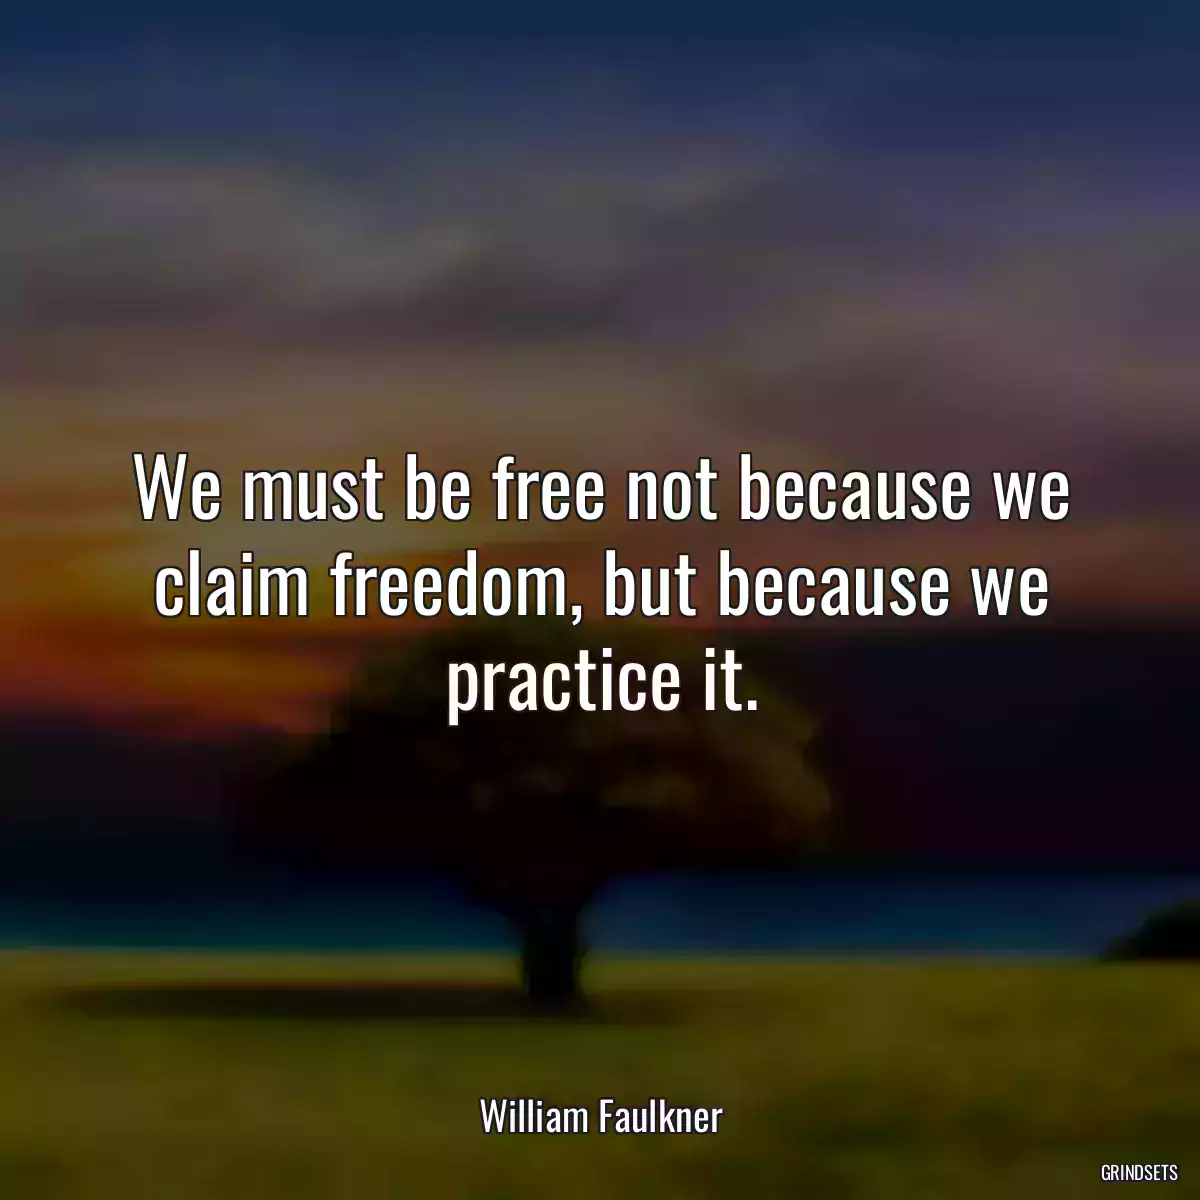 We must be free not because we claim freedom, but because we practice it.